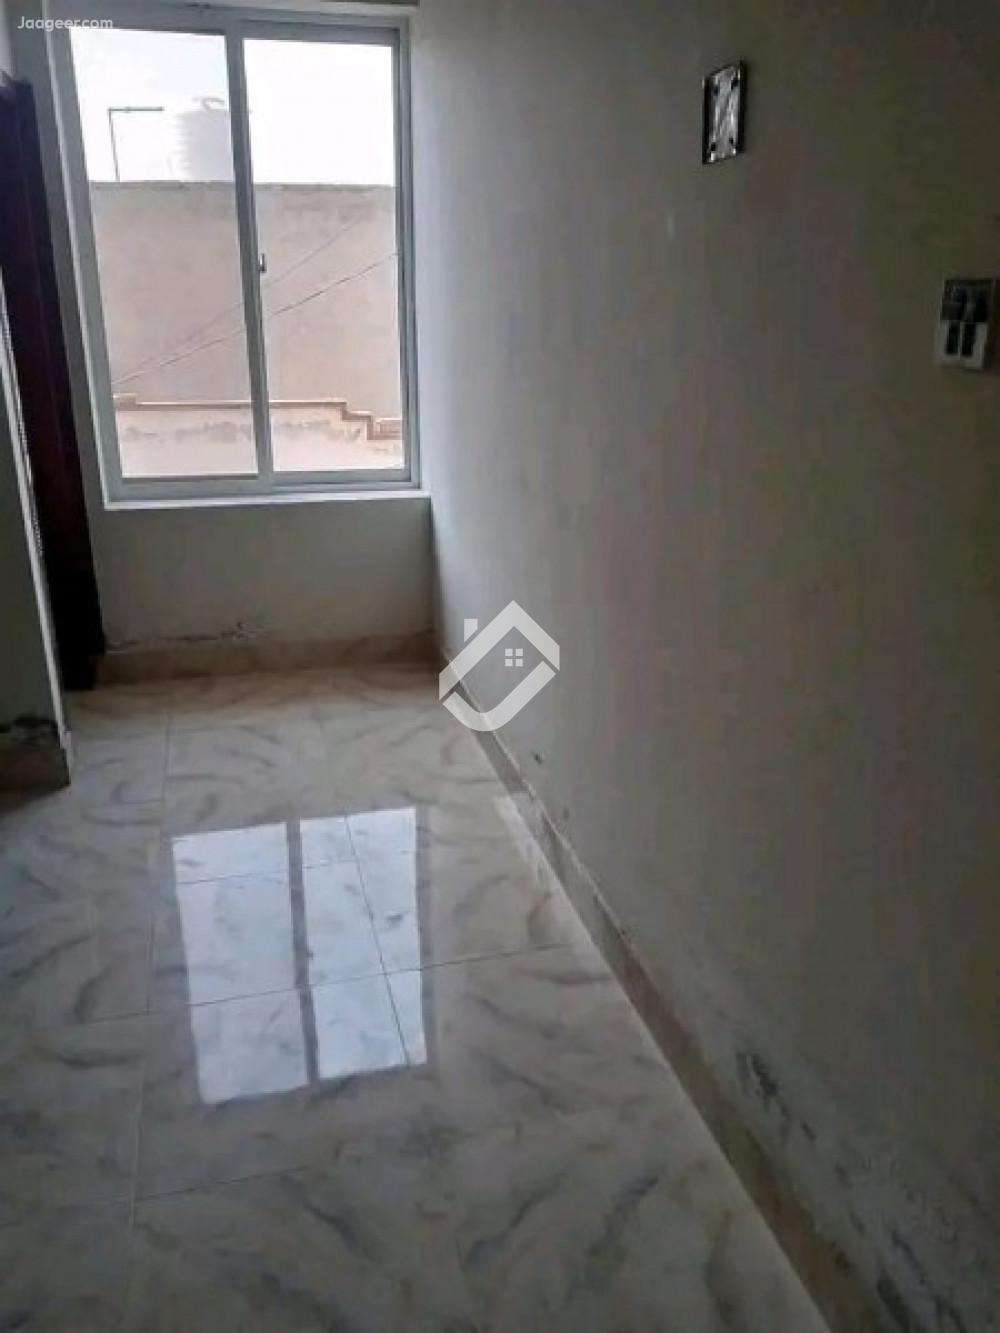 View  2.5 Marla Upper Portion House For Rent In Waqar Town in Waqar Town, Sargodha